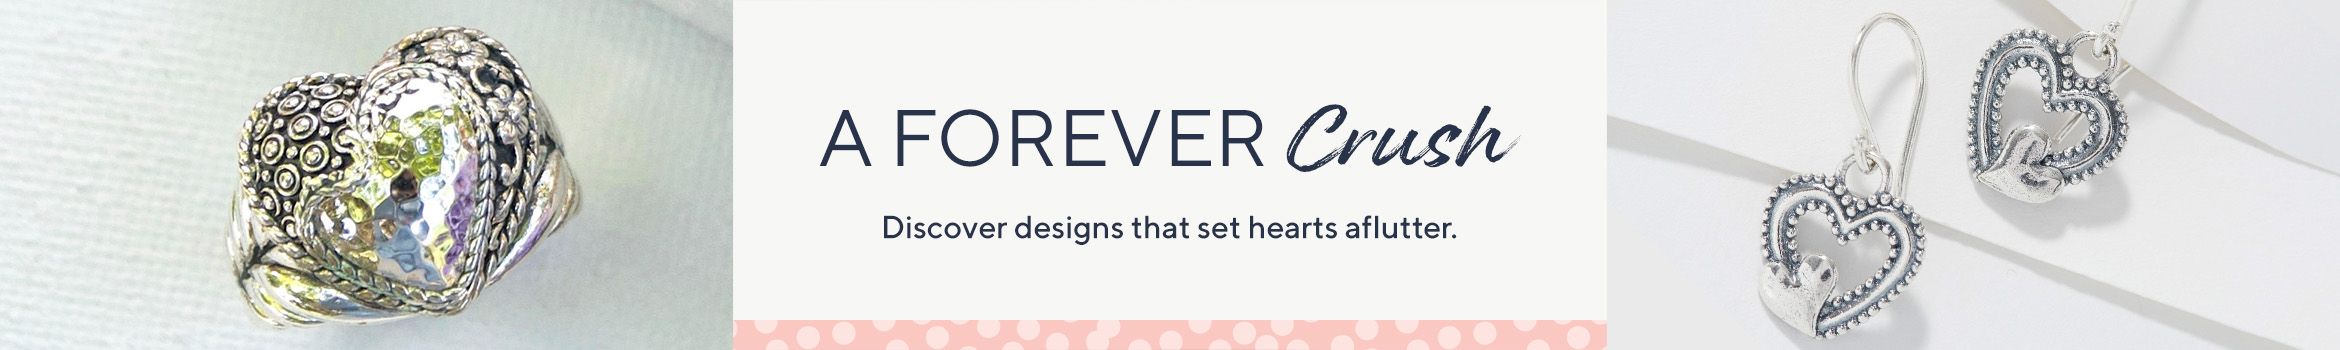 A Forever Crush - Discover designs that set hearts aflutter.